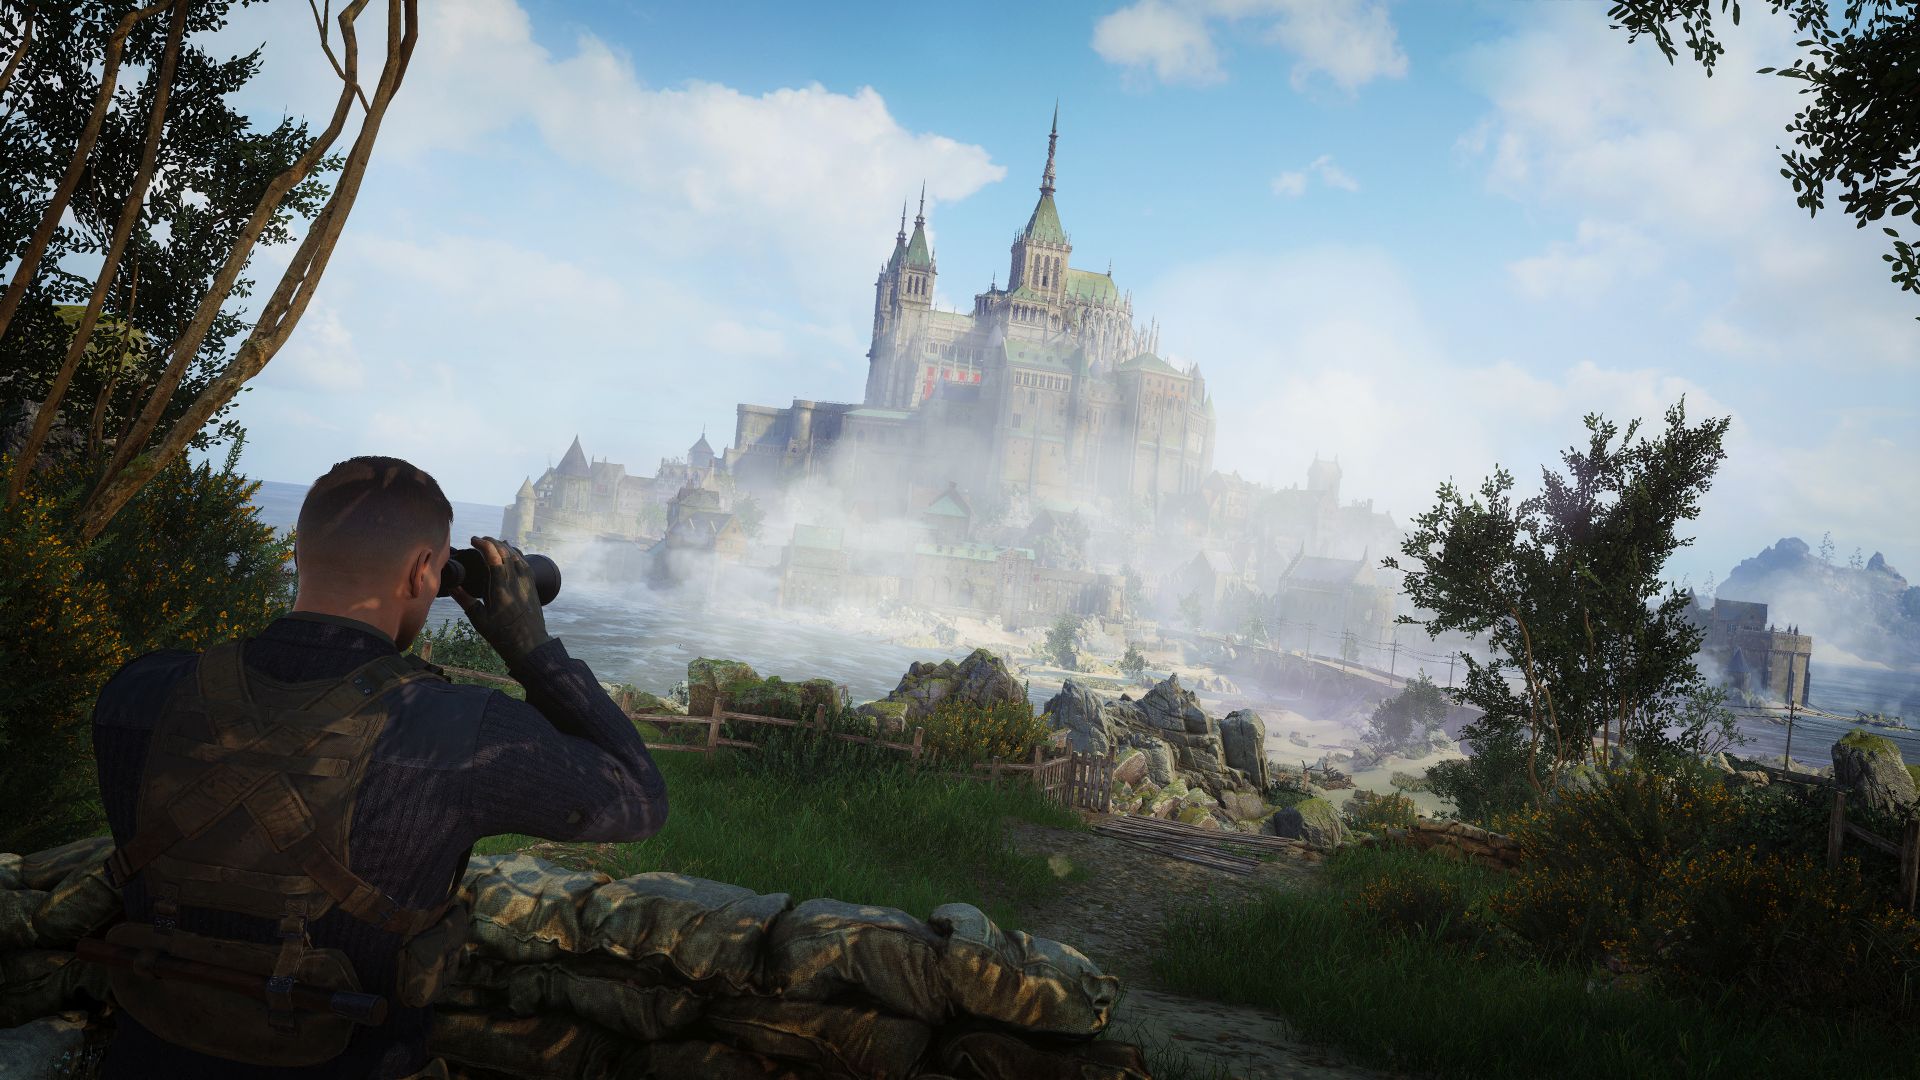 Karl, using binoculars, stands behind a sandbag wall in the shade of trees. He looks out towards an island where a grand Abbey towers above the rest of the buildings. 